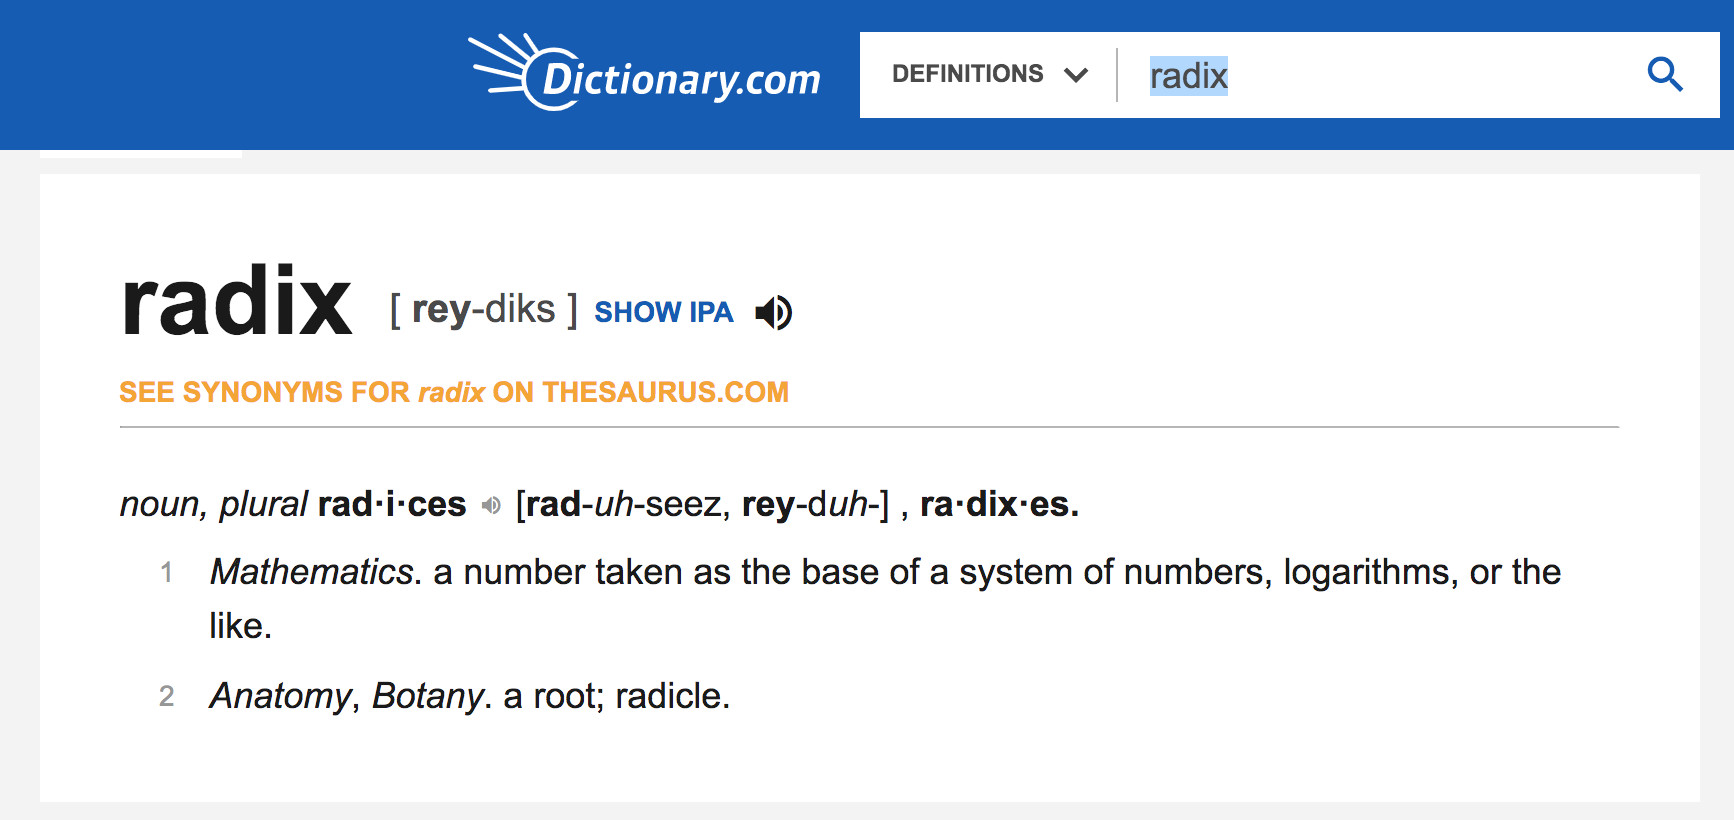 dictionary.com screenshot of the definition of the word 